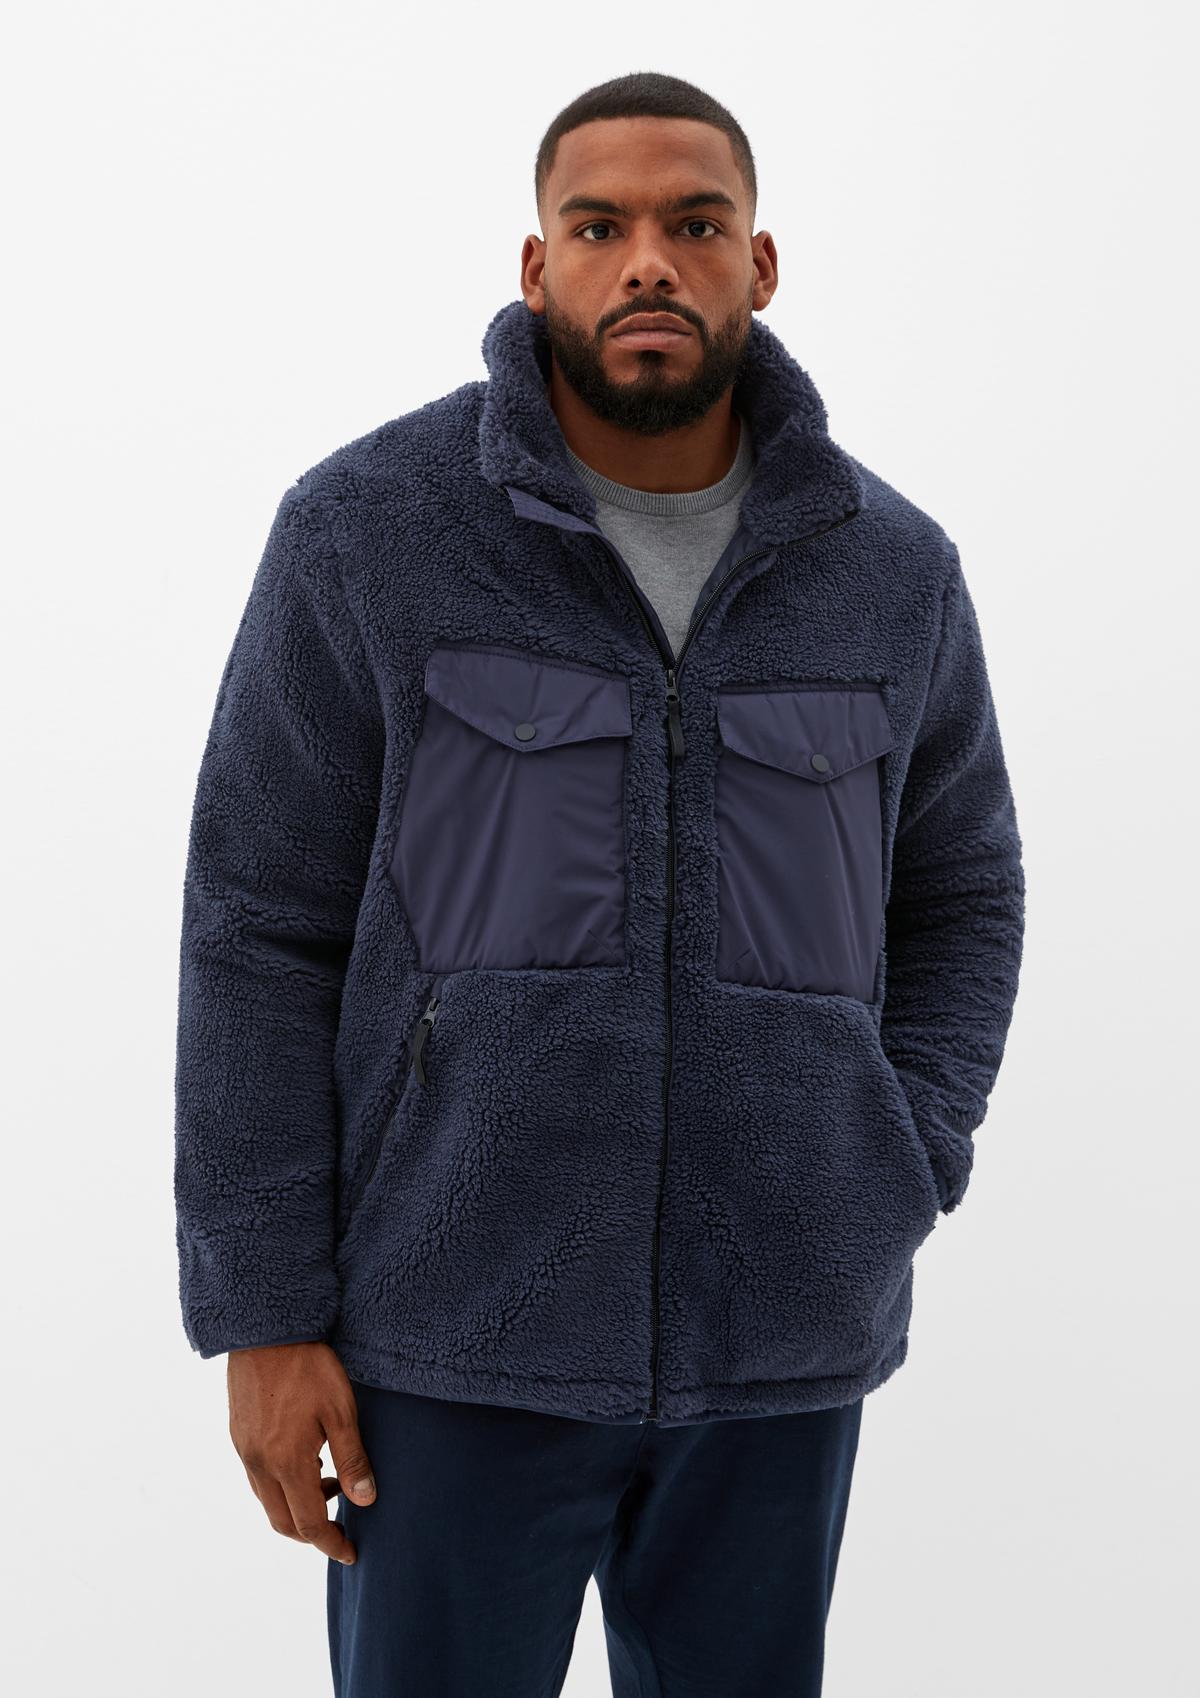 Jacket in a mix of materials - navy